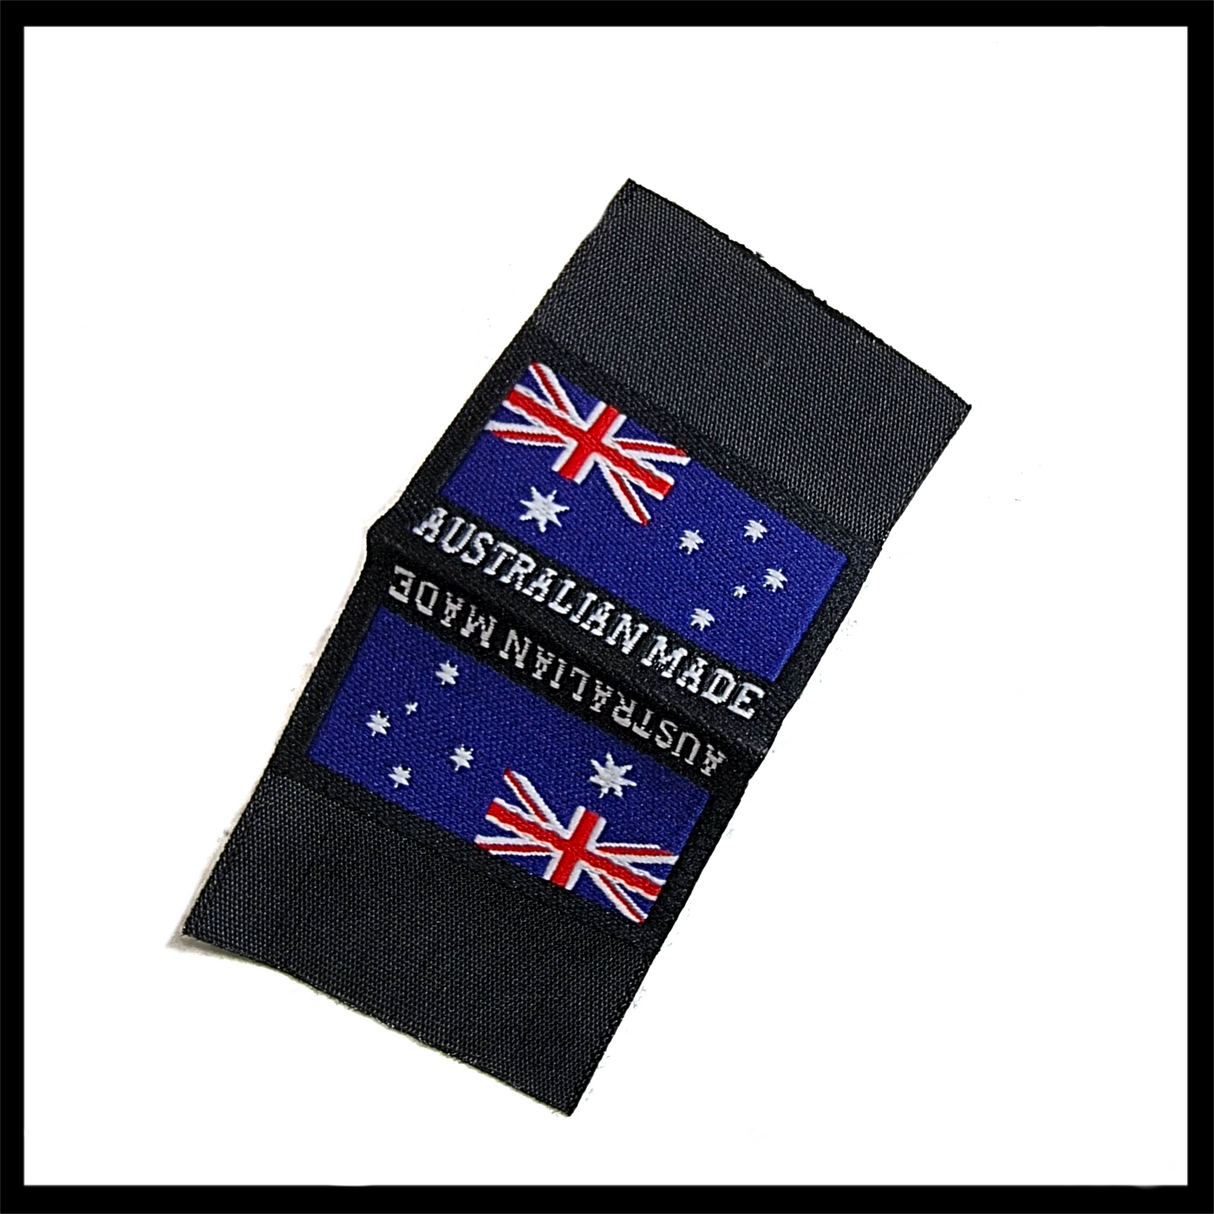 M8Tex "Australian Made" Sew-On Woven Labels